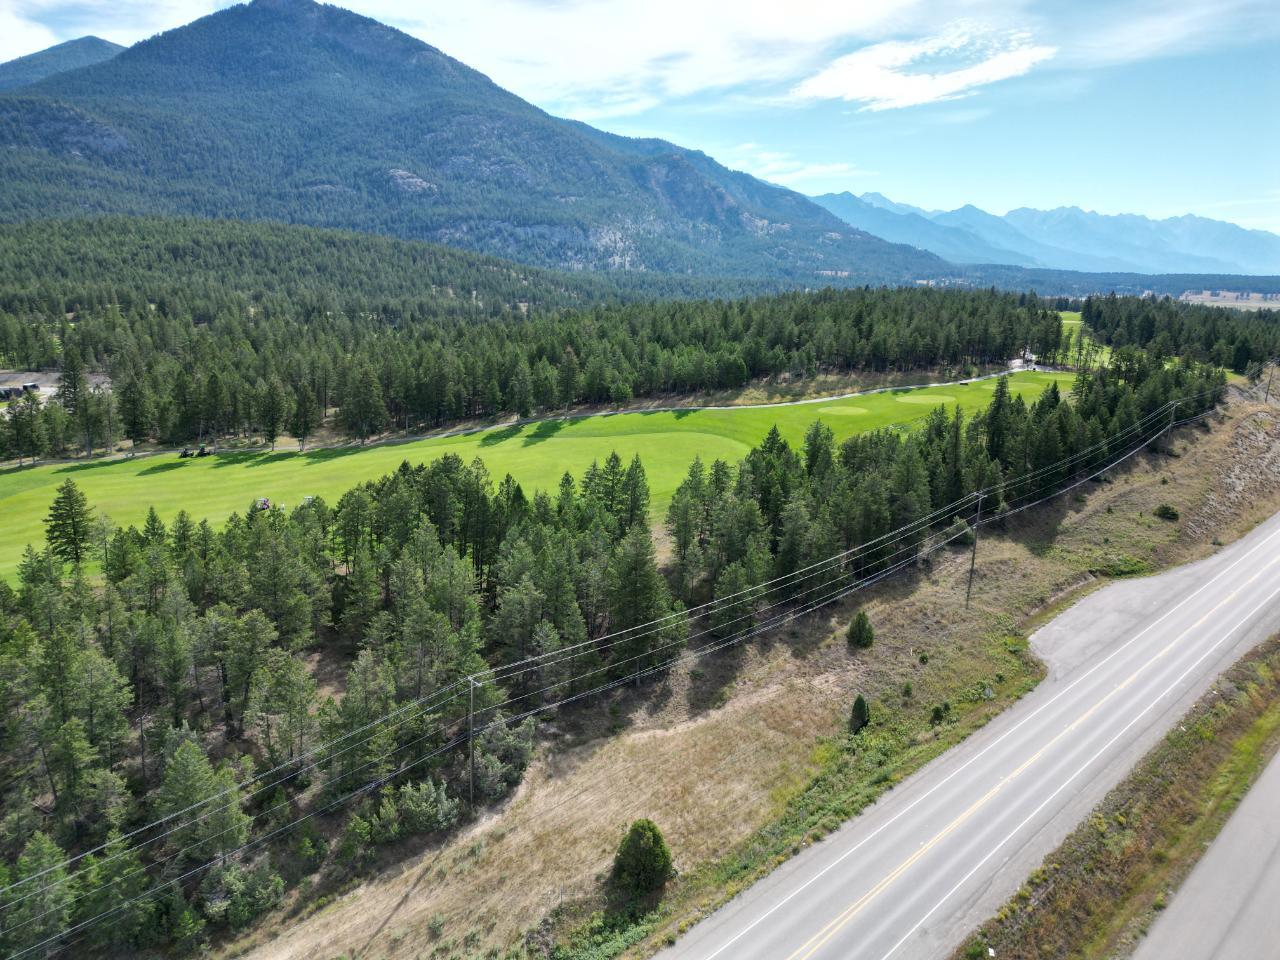 Lot 7 EMERALD EAST FRONTAGE ROAD located in Windermere, British Columbia